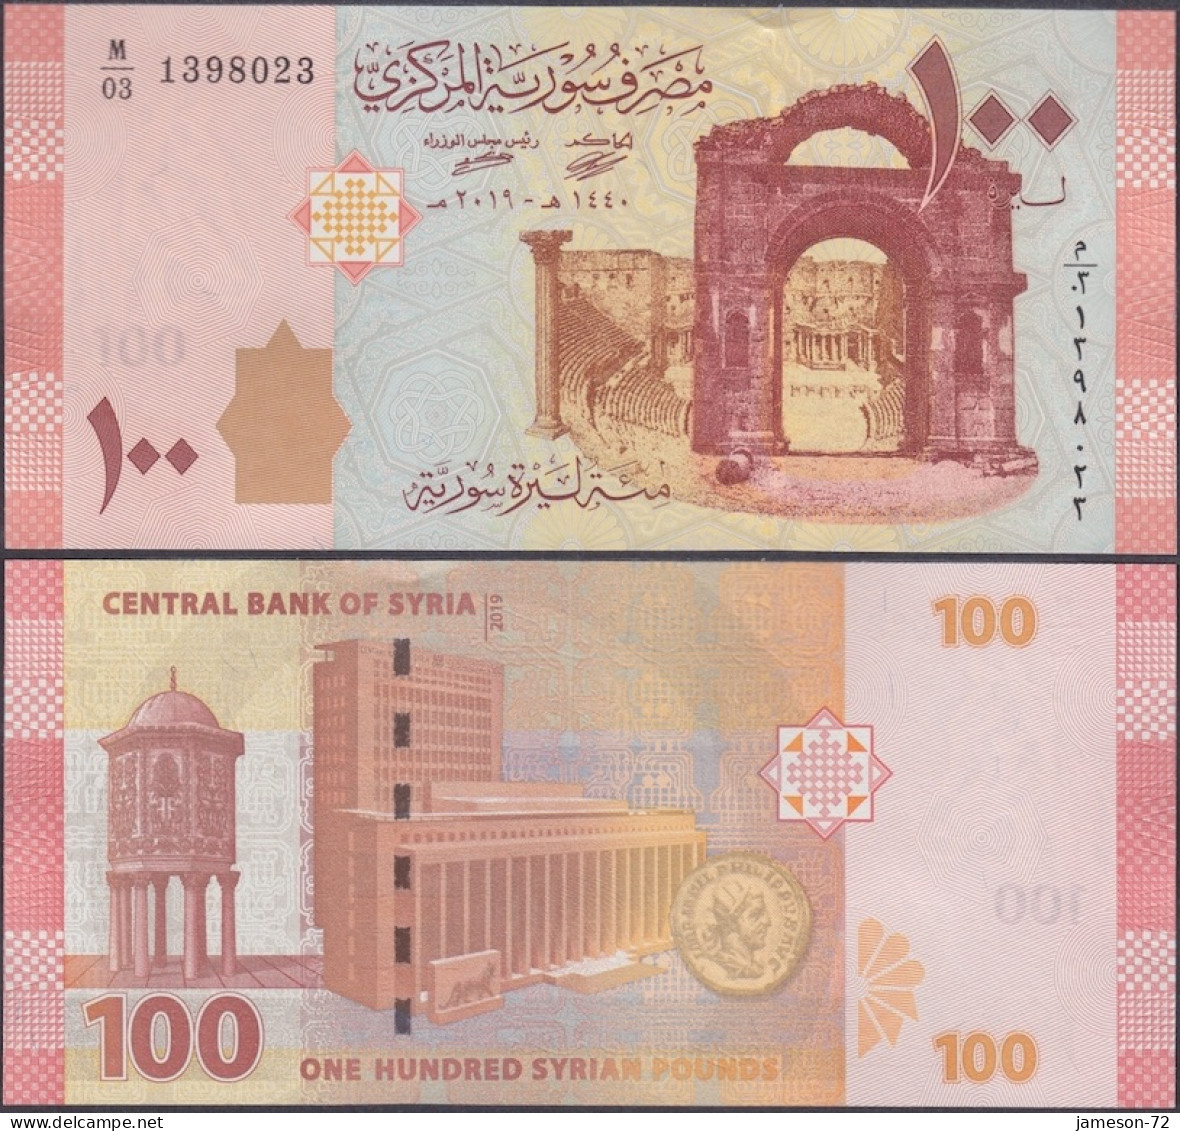 SYRIA - 100 Pounds AH1440 2019AD P# 113 Middle East Banknote - Edelweiss Coins - Syrien